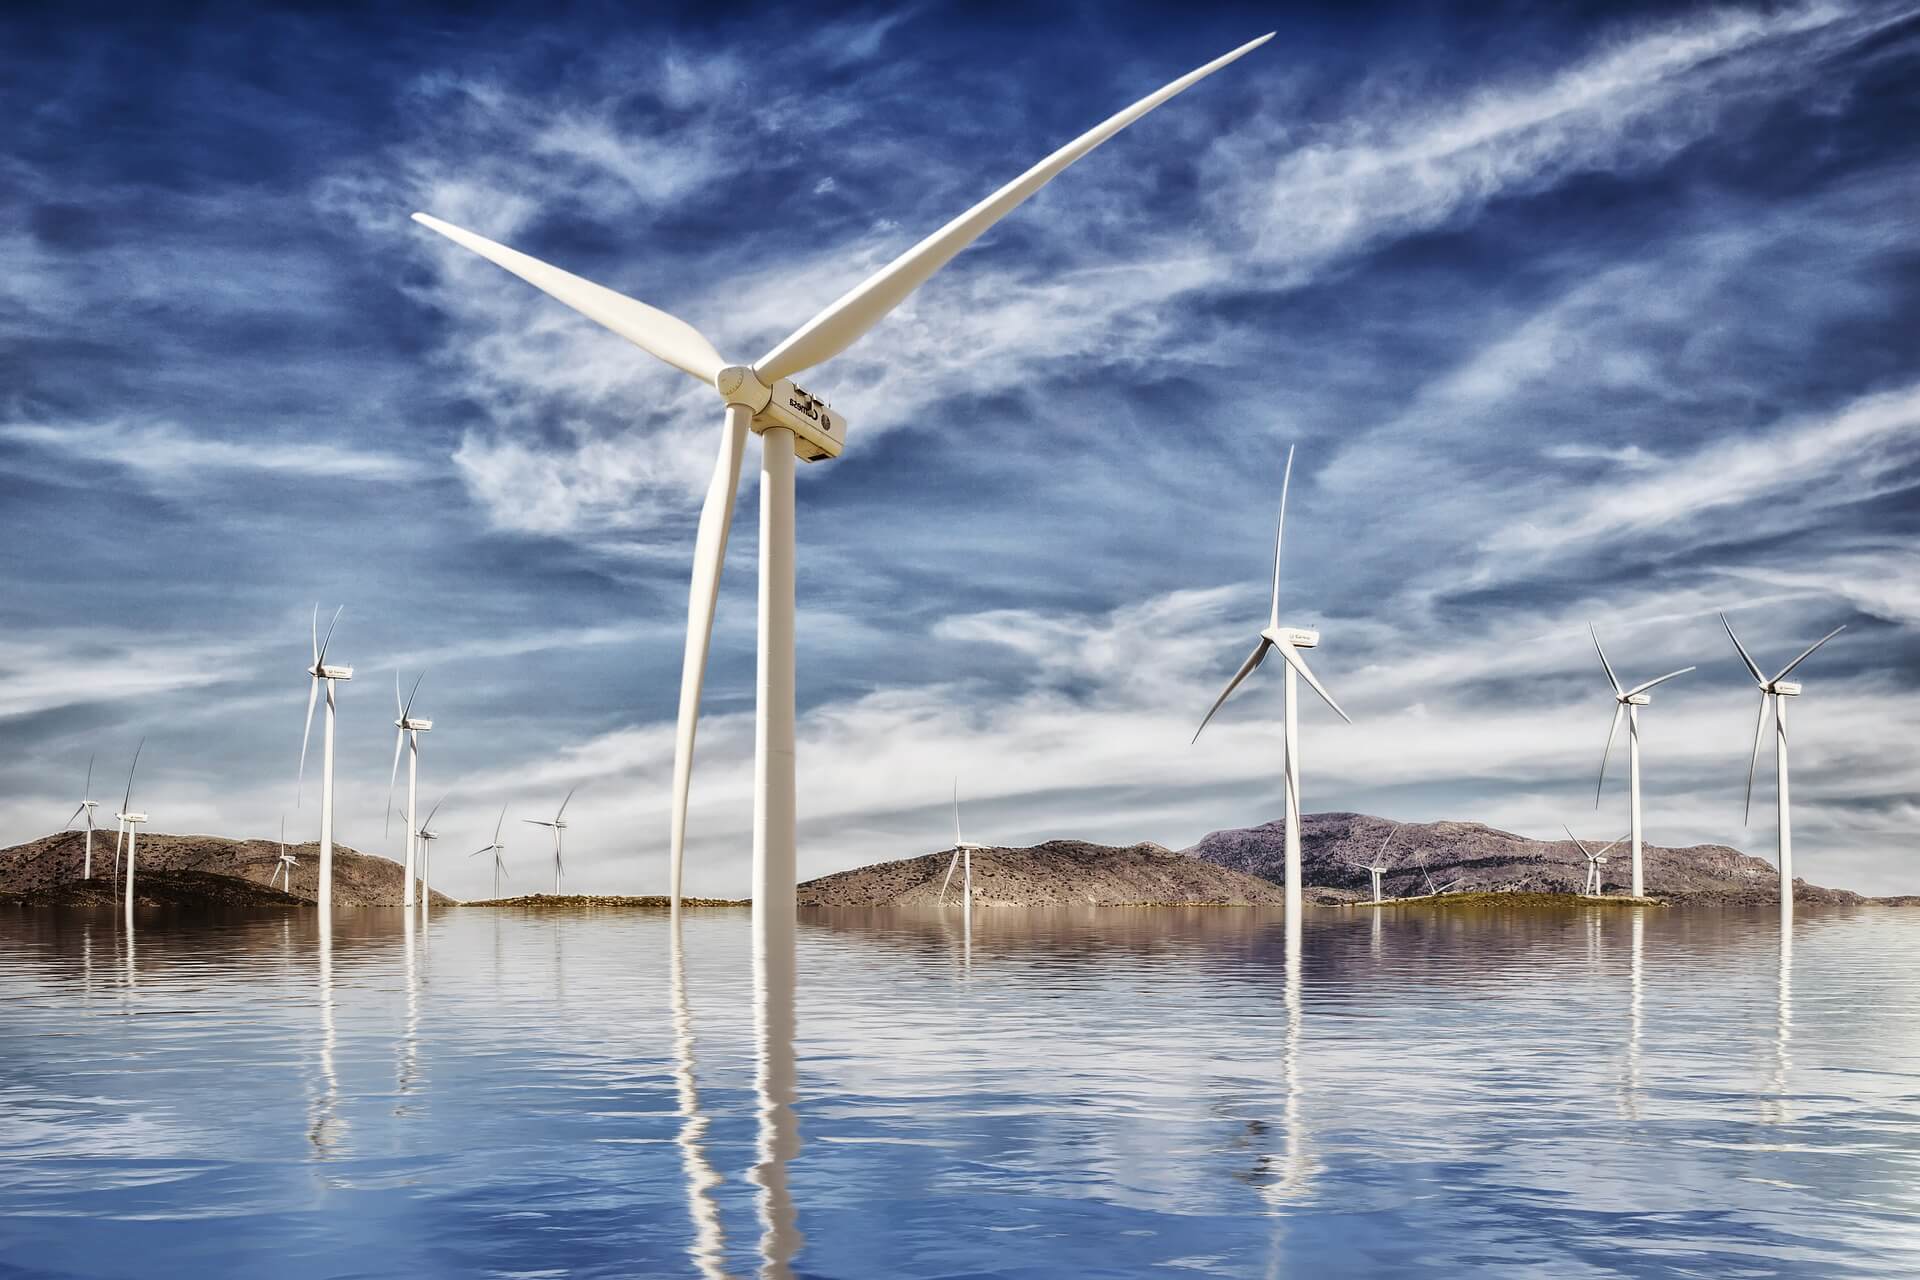 15 Interesting Facts on Wind Energy & Offshore Wind Farms